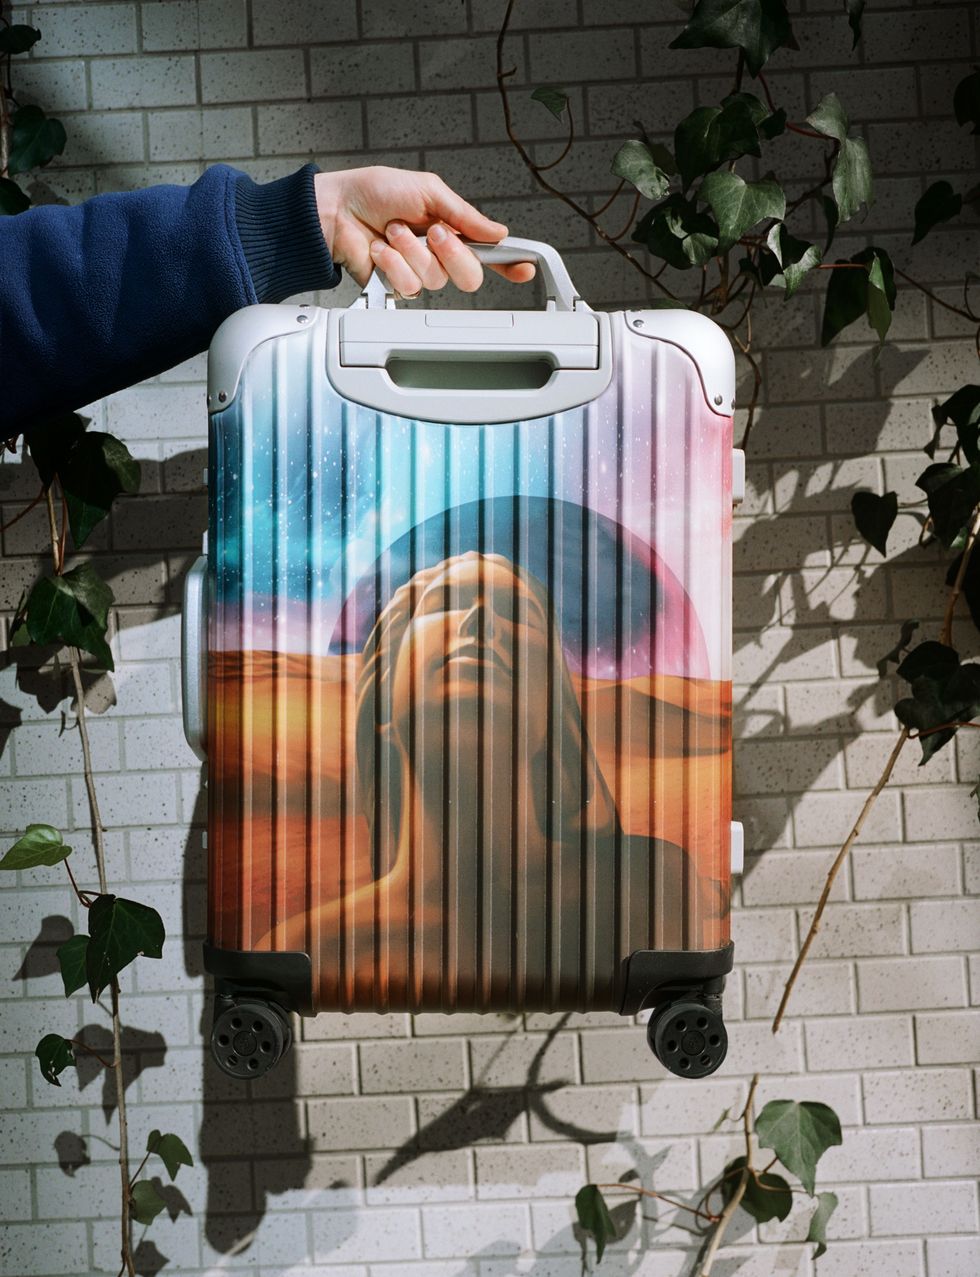 RIMOWA's campaign highlights suitcases as beloved, lifelong travel